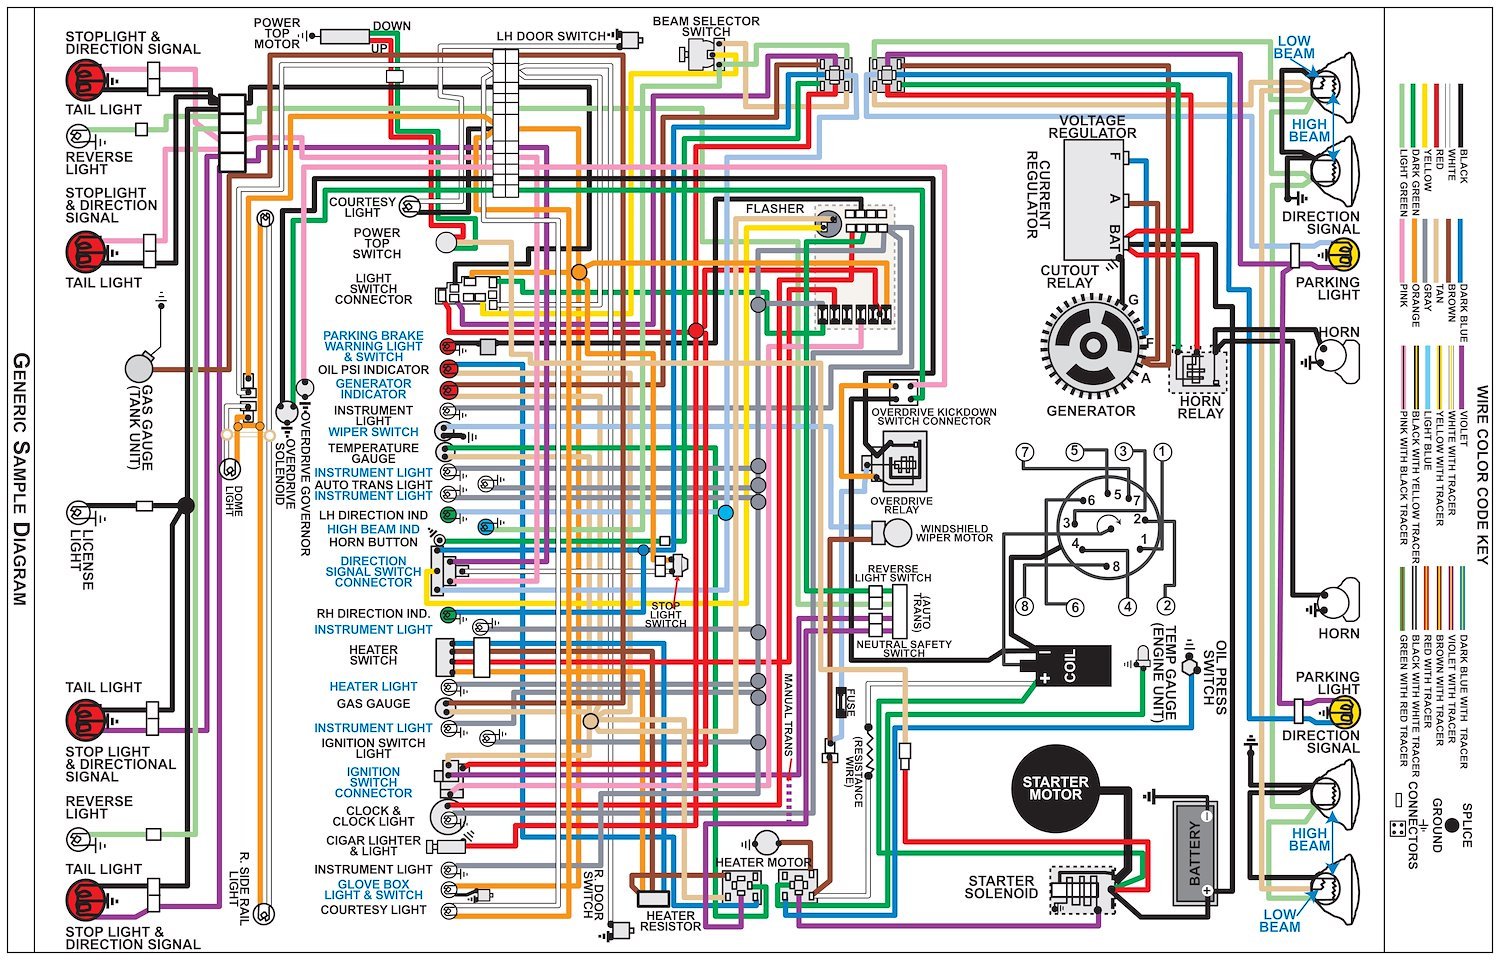 Wiring Diagram for 1968 Ford Mustang, 11 in x 17 in., Laminated